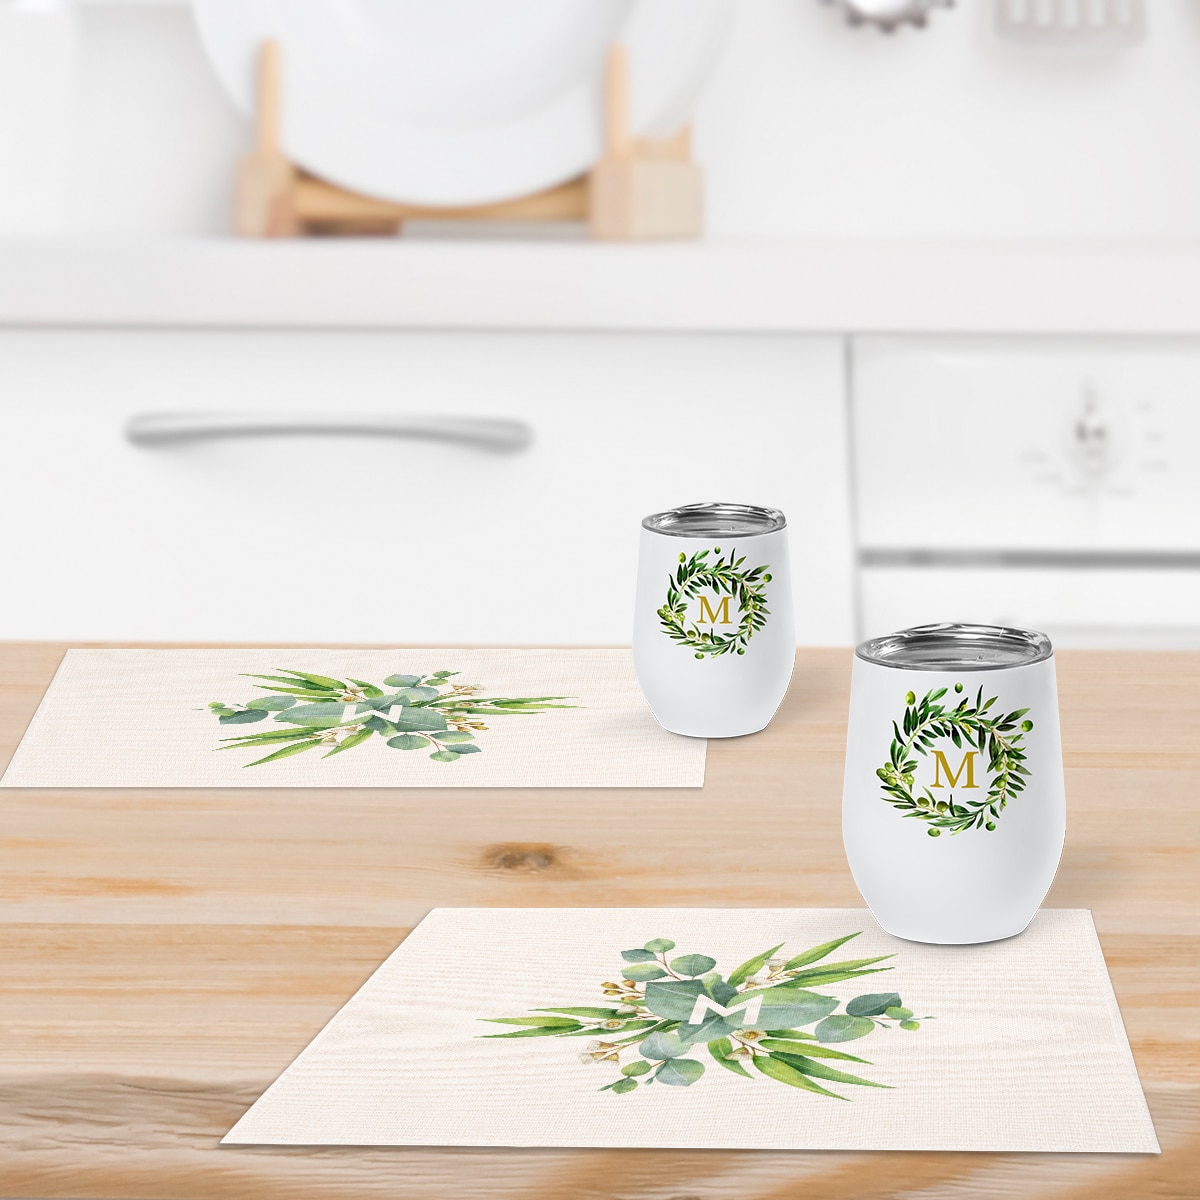 Customize your table with Snapfish personalized table and drinkware